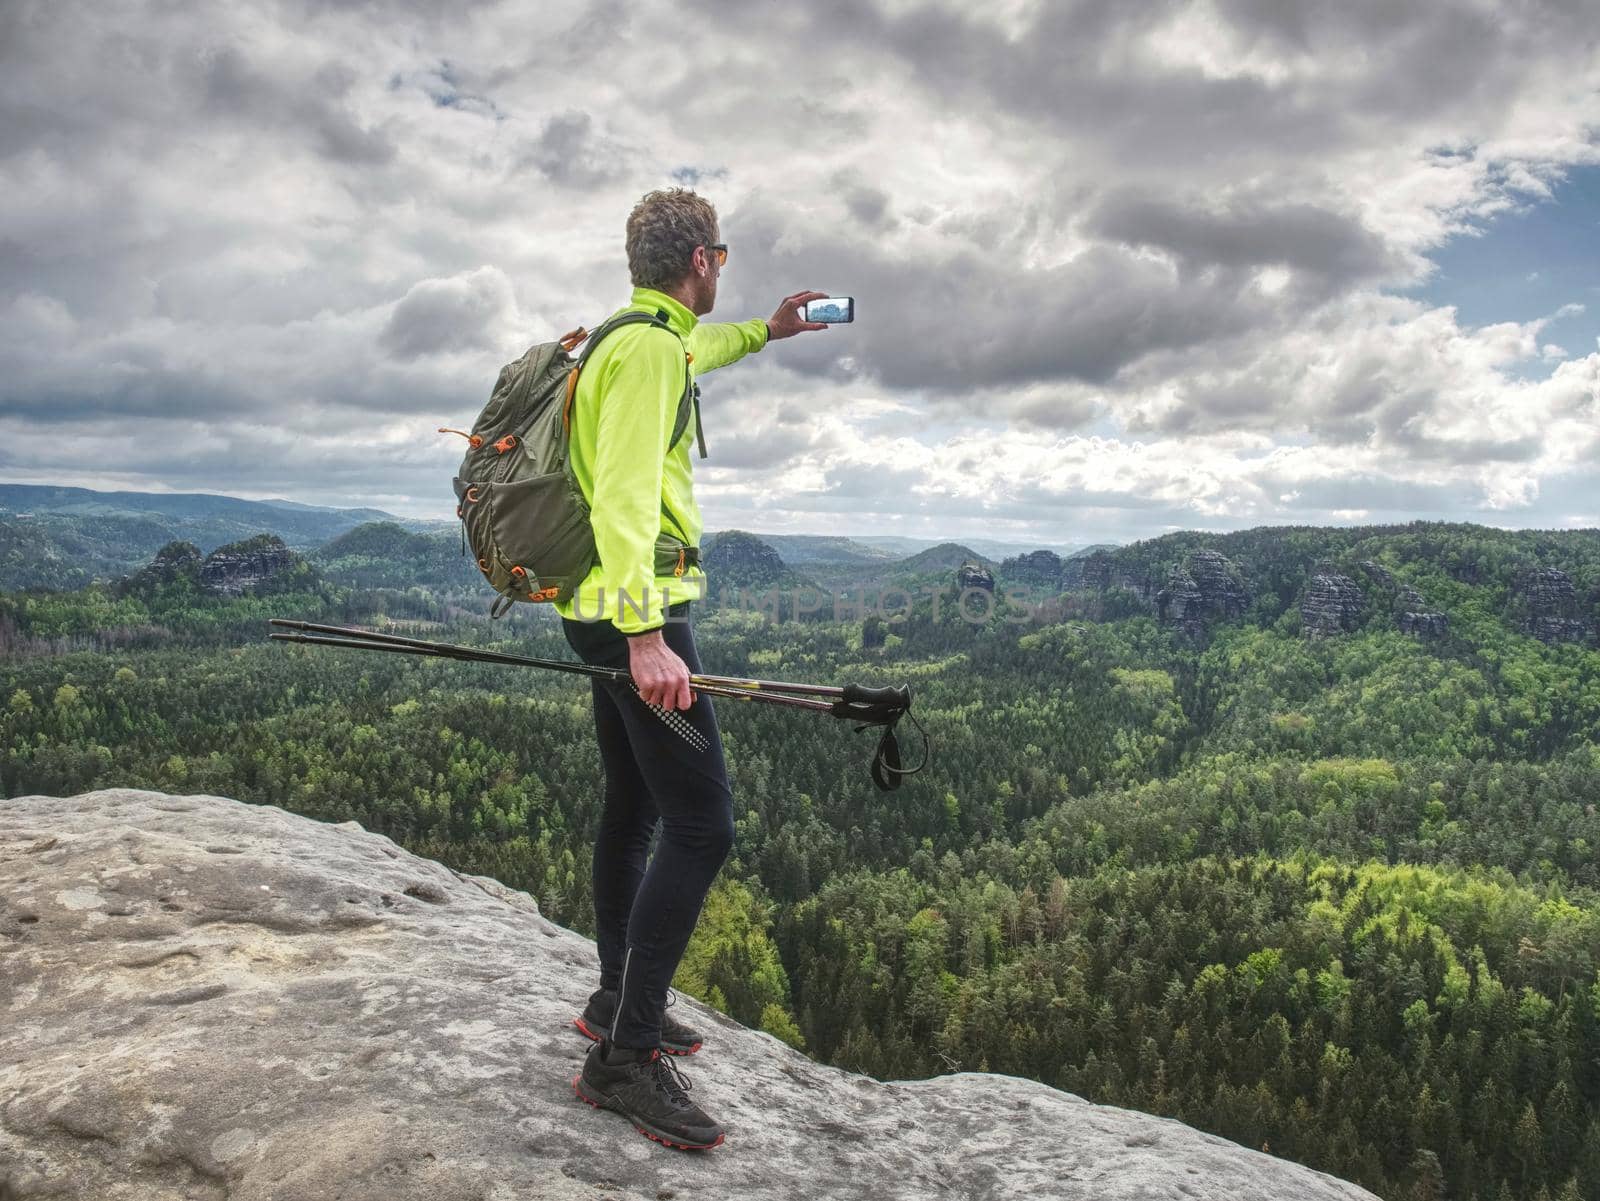 Backpacker with phone in hand. Sunny spring valley in rocky mountains. Hiker with backpack stand on rocky view point